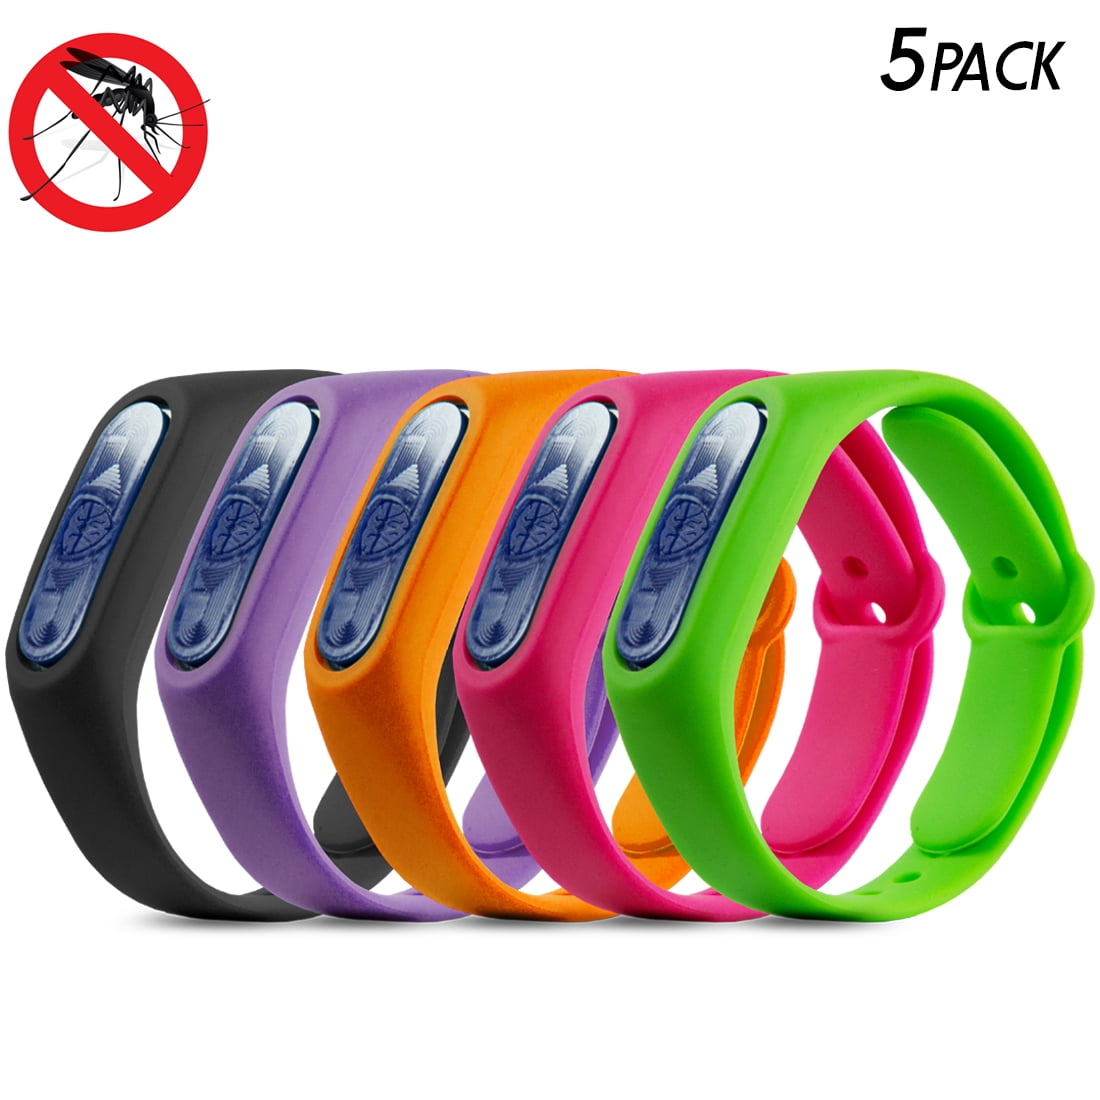 BUG OFF Wristband Repels Insects~FAMILY 10-Pack~Mosquito Deterrent SAFE for Kids